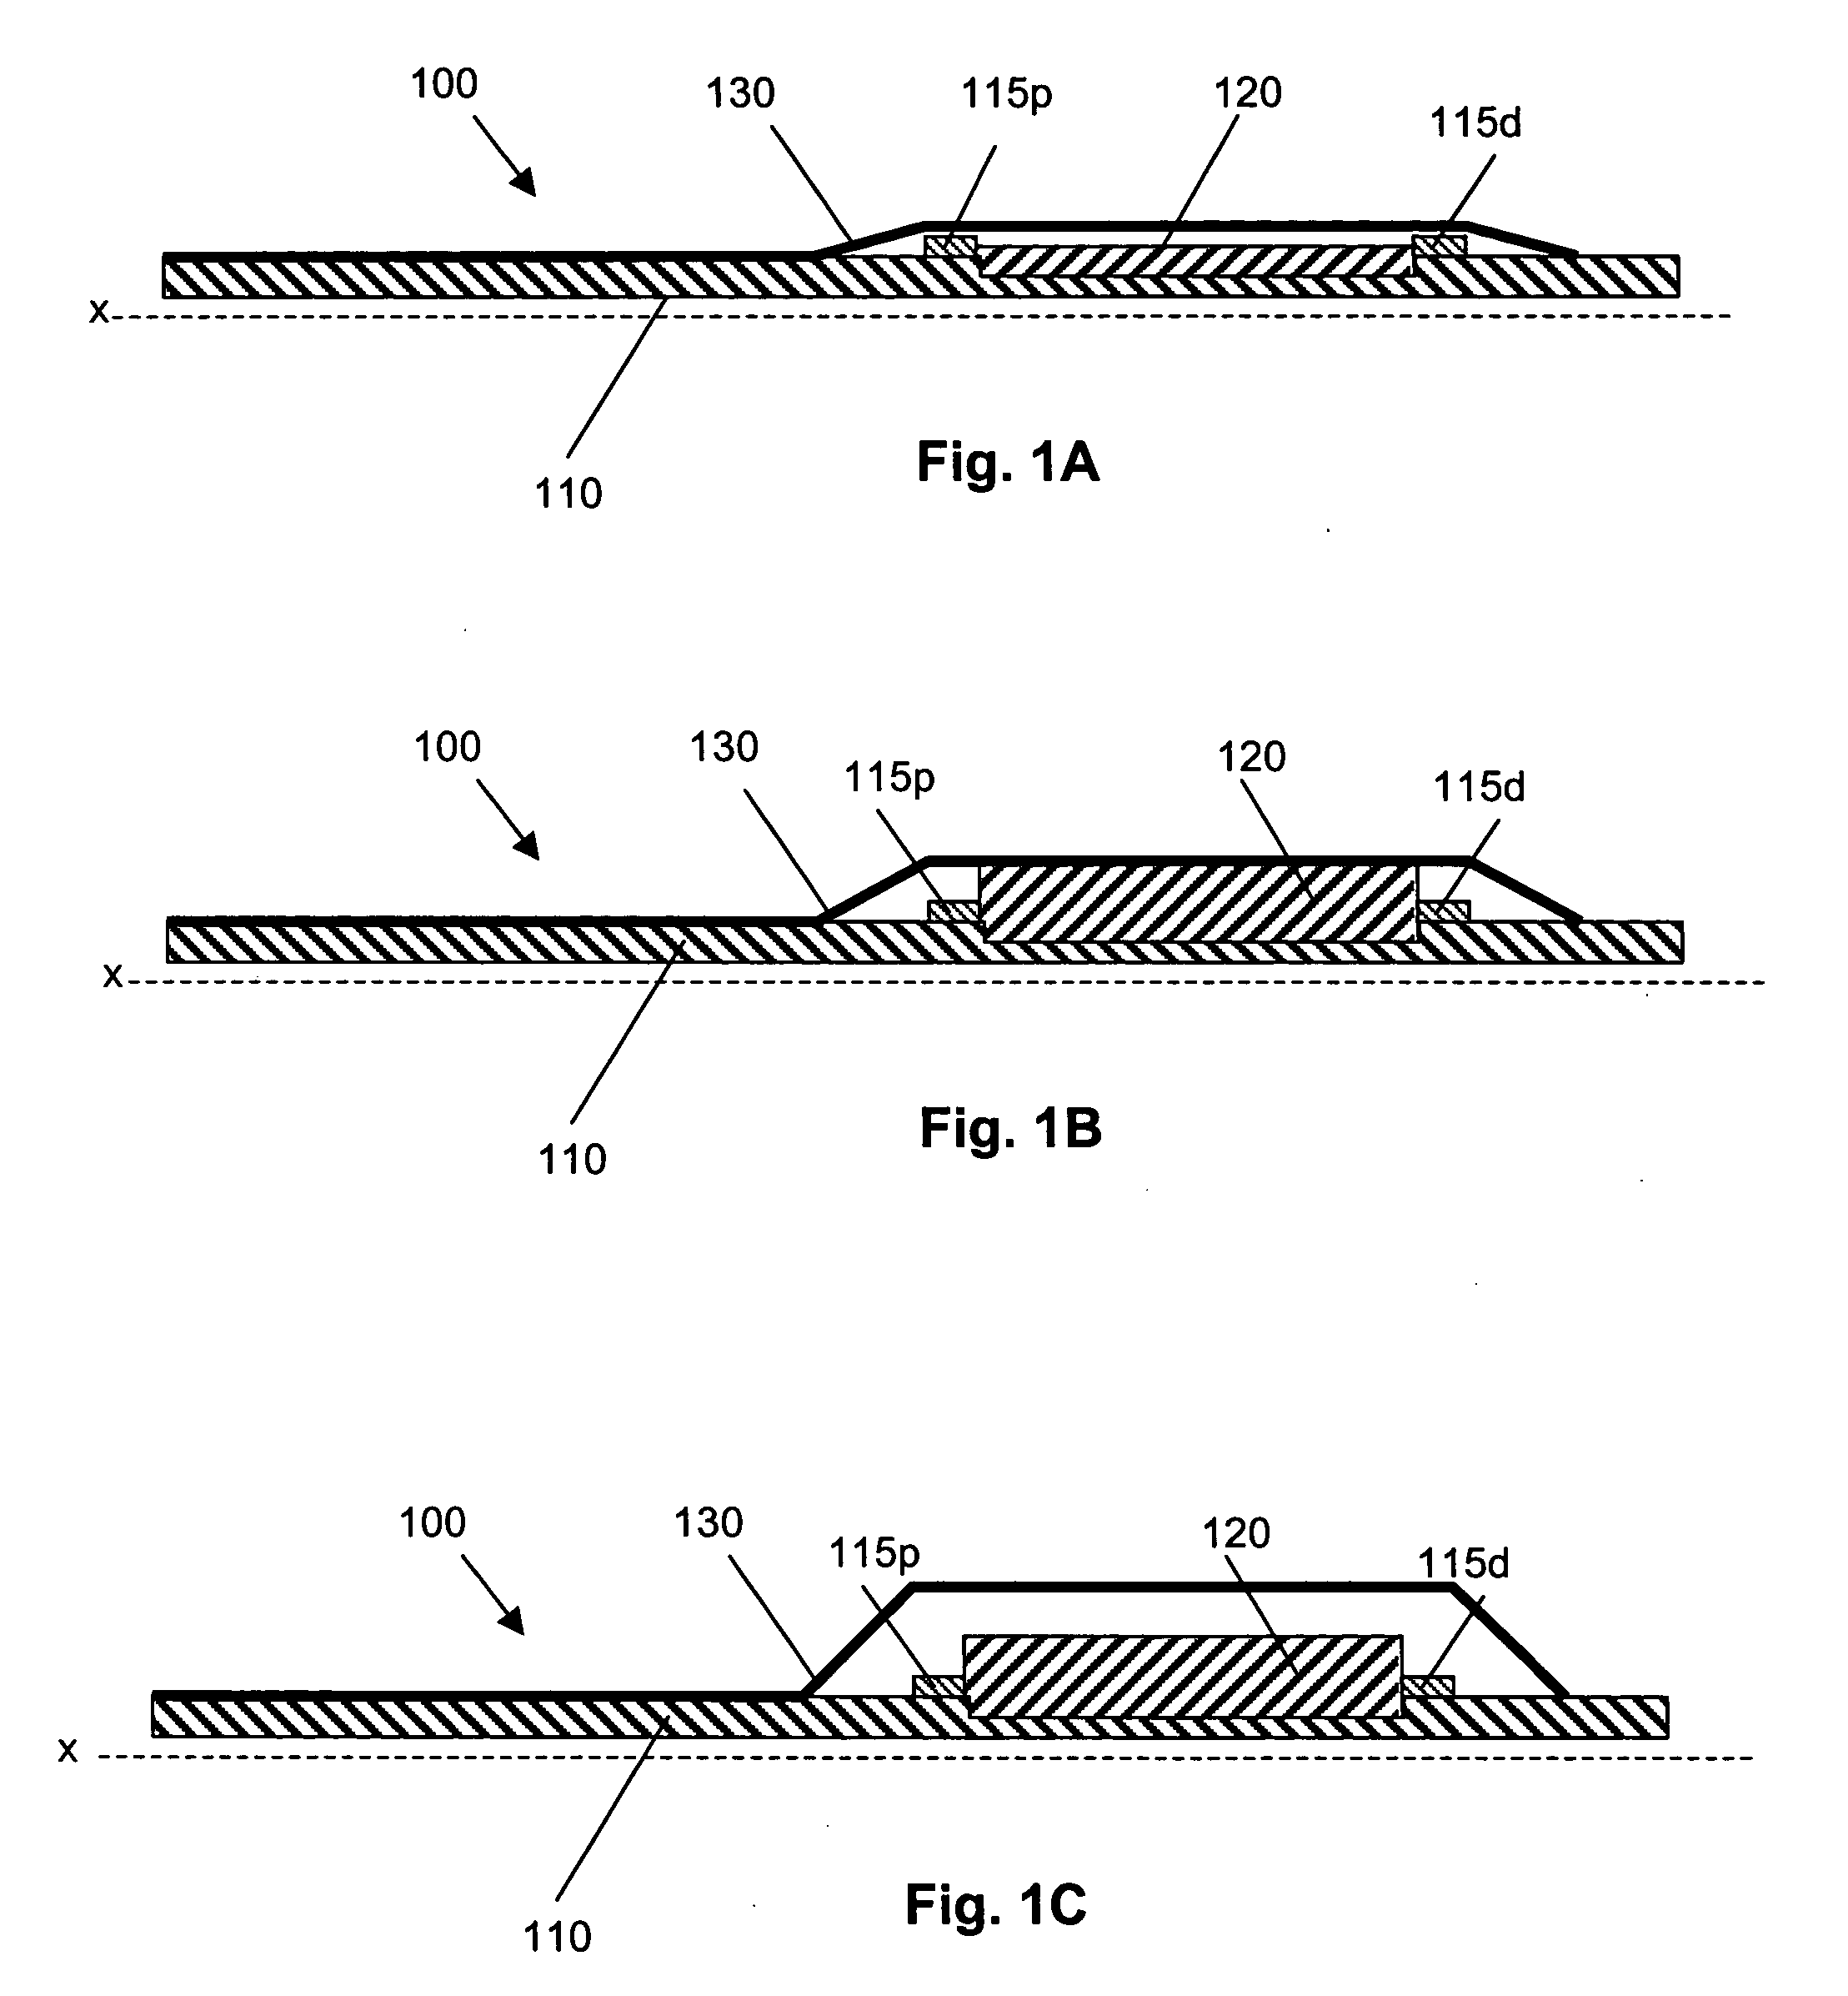 Electrically actuated medical devices